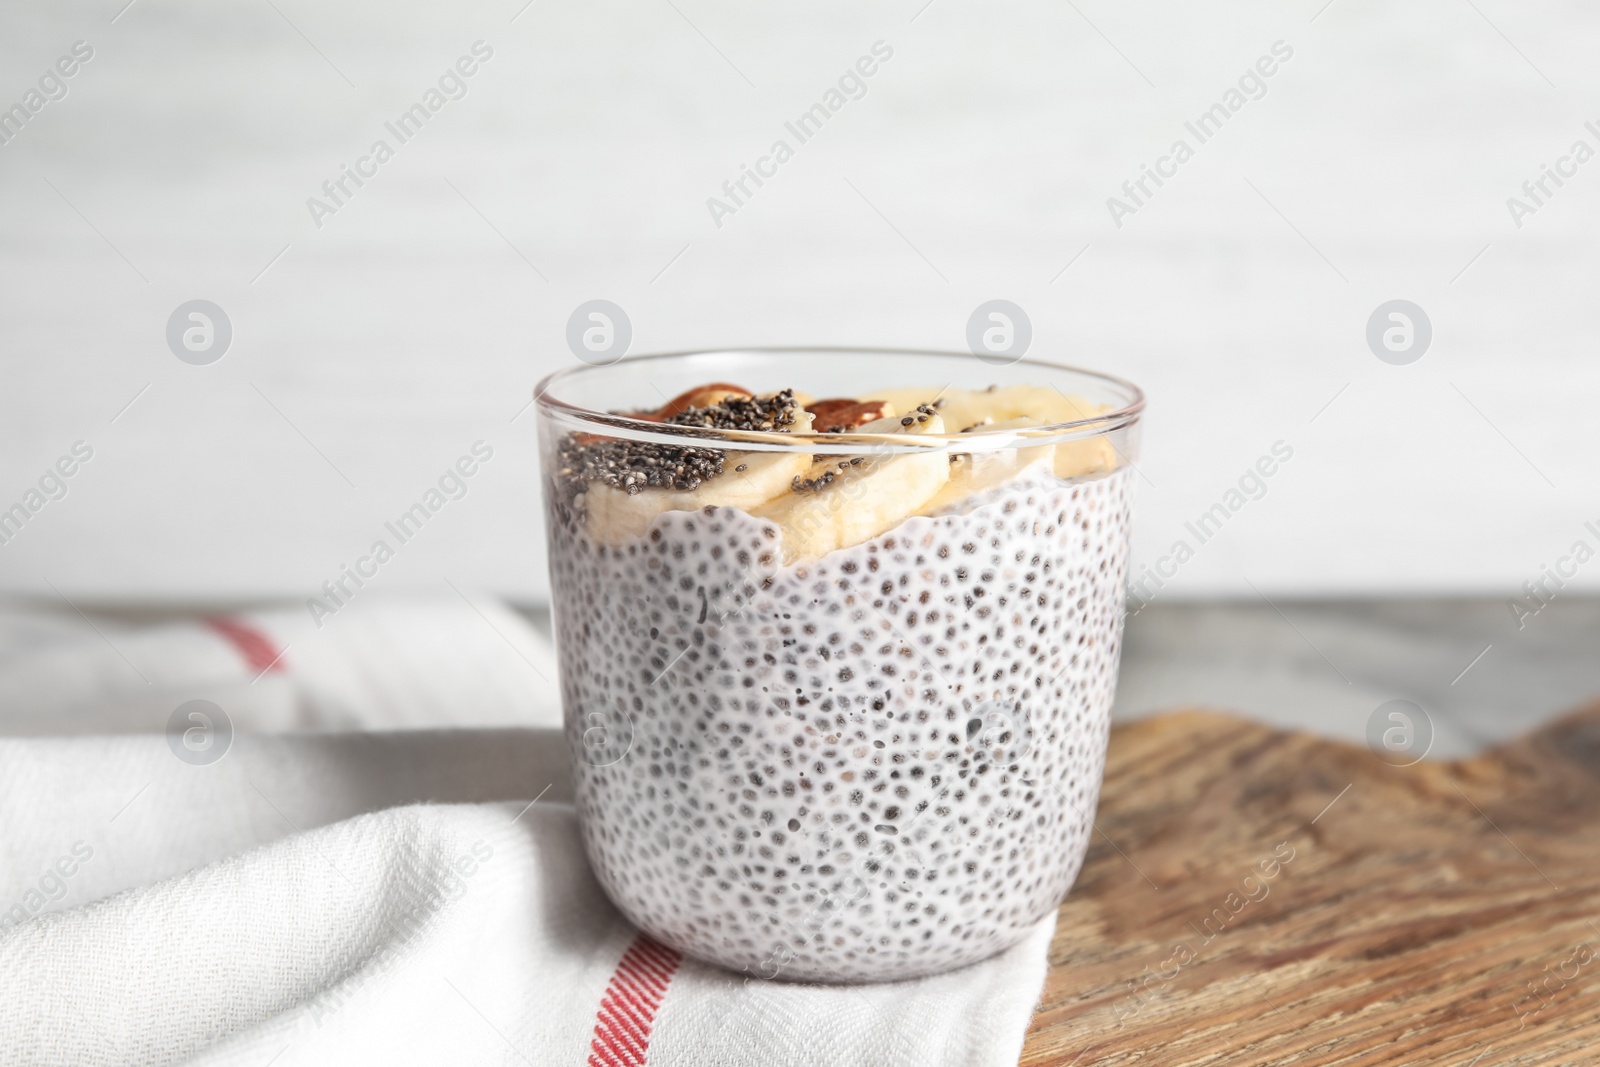 Photo of Dessert bowl of tasty chia seed pudding with banana on table